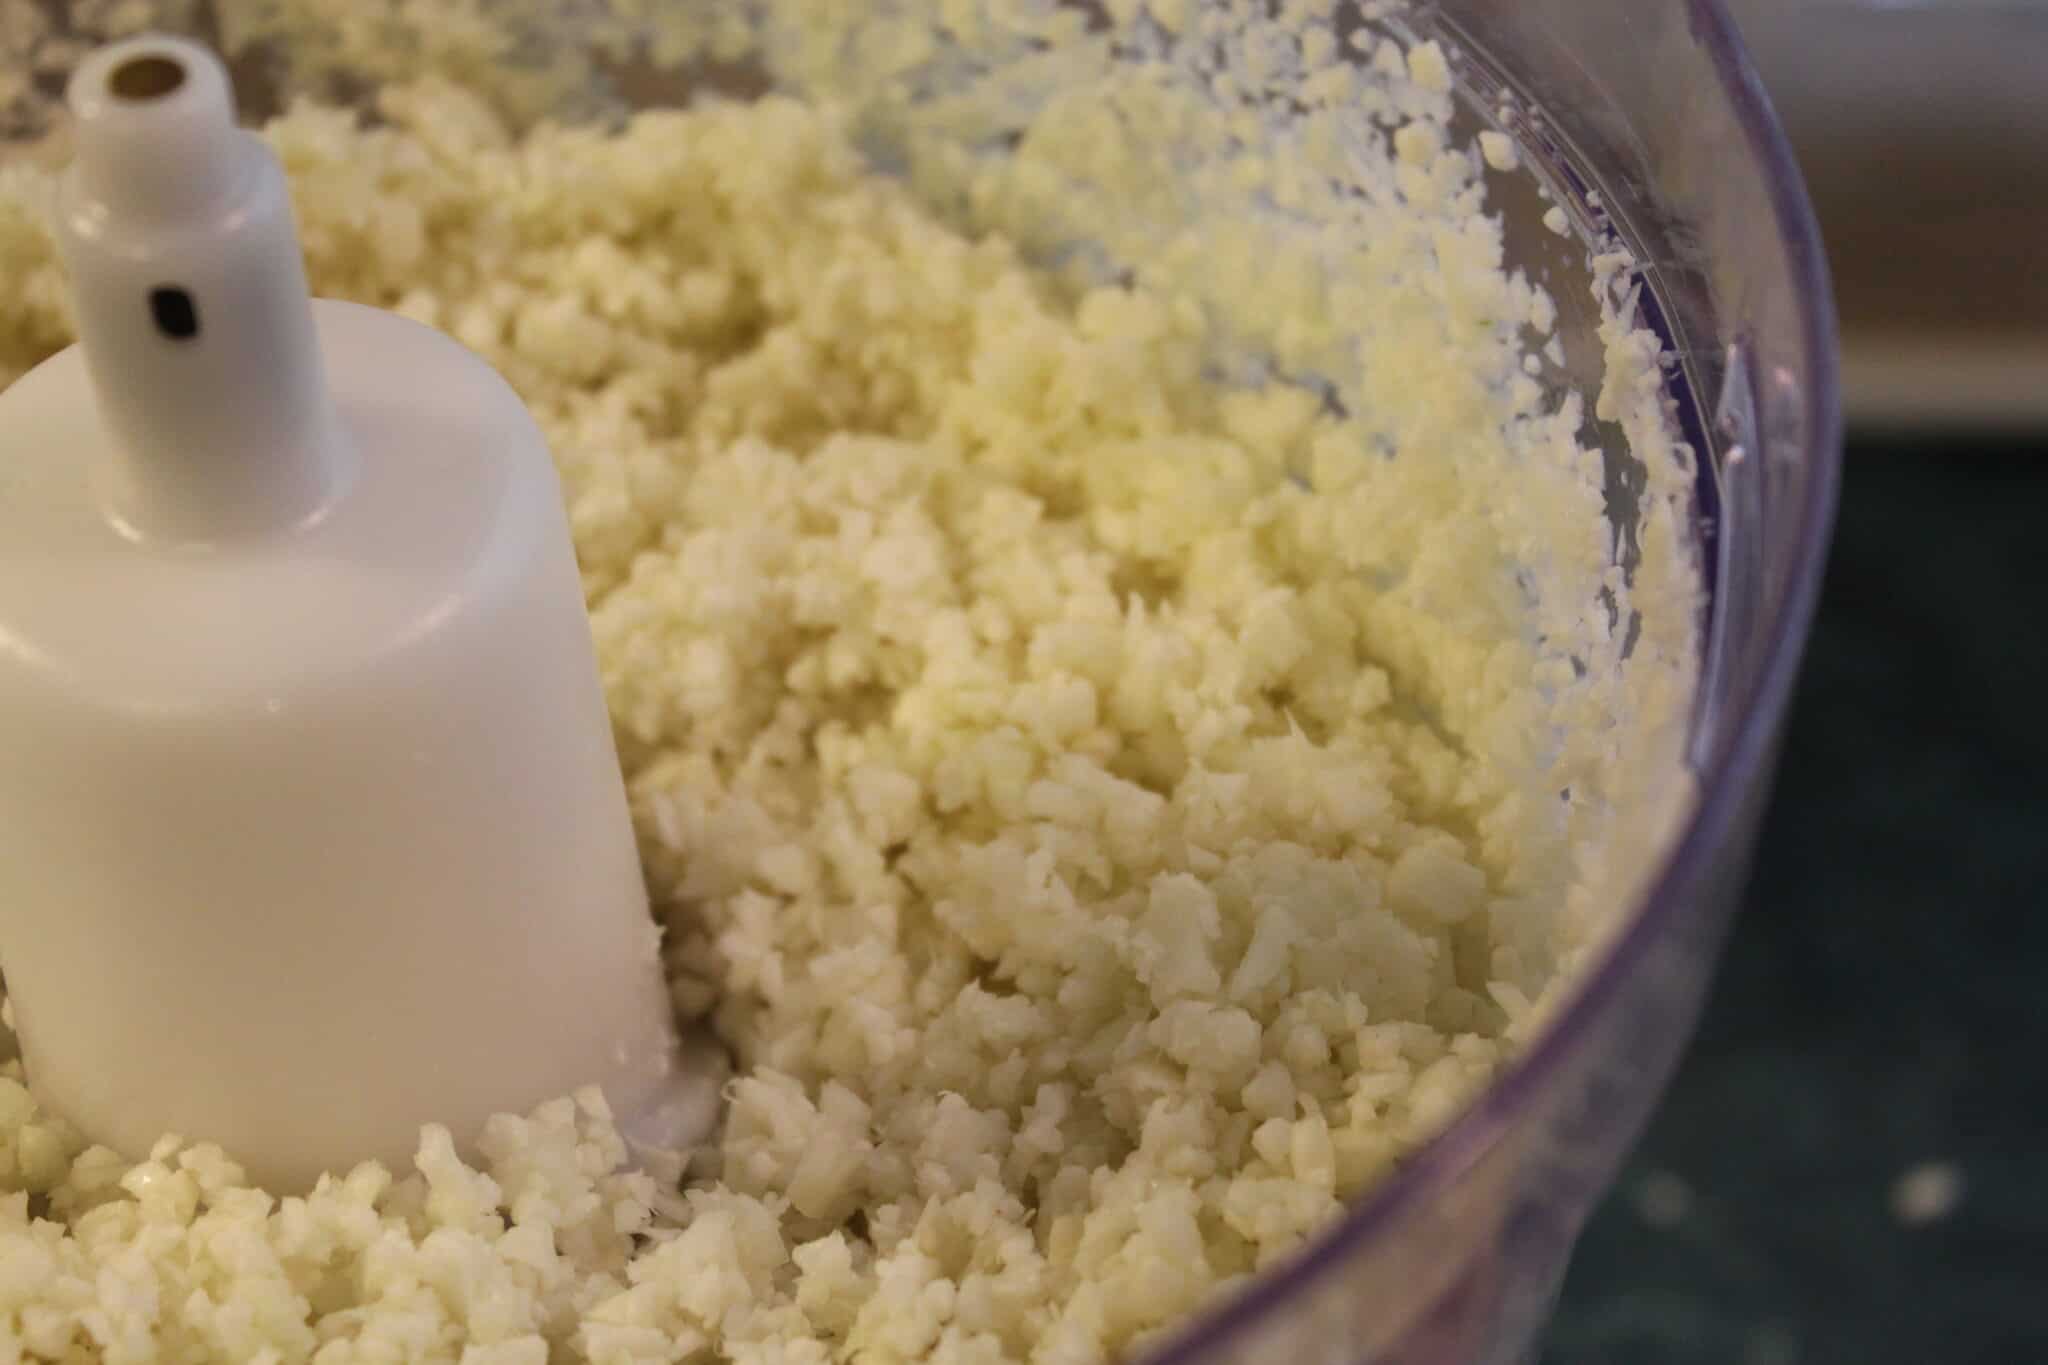 How Do You Rice Cauliflower Without A Food Processor